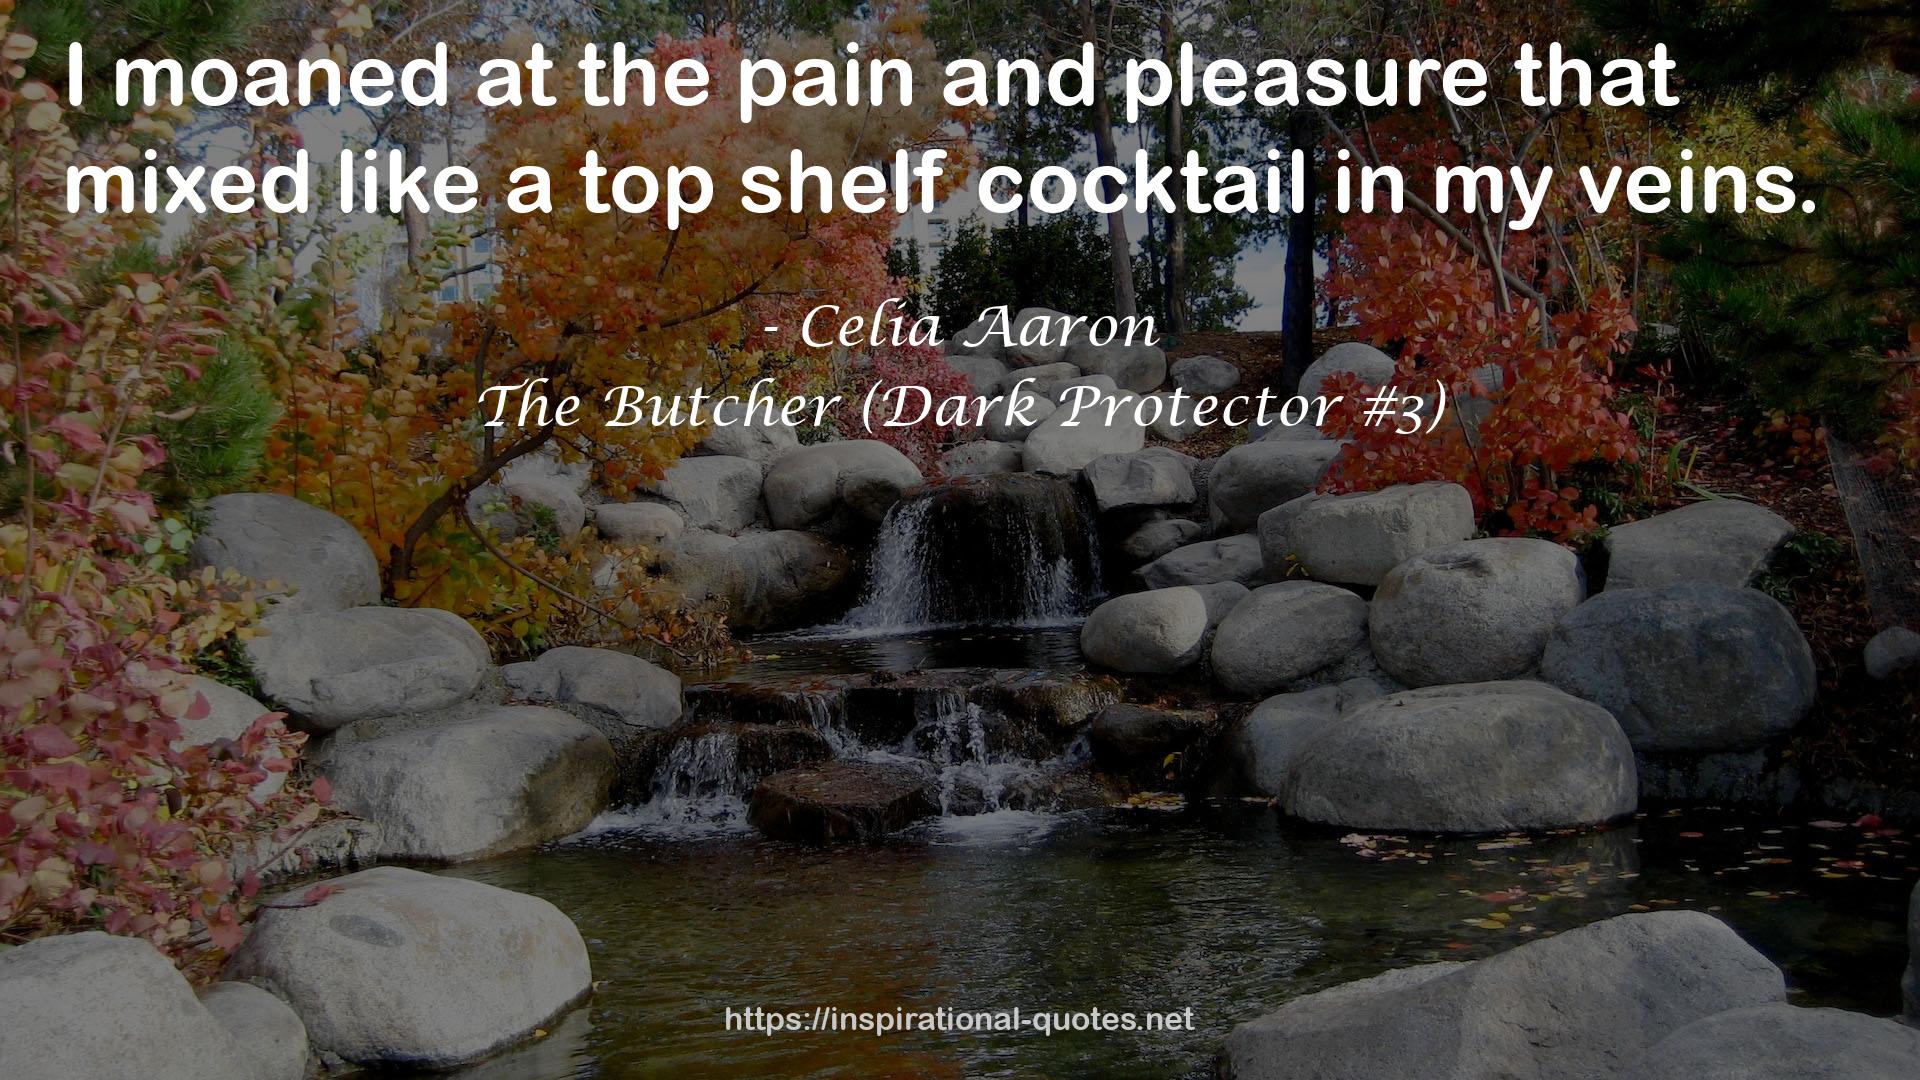 The Butcher (Dark Protector #3) QUOTES